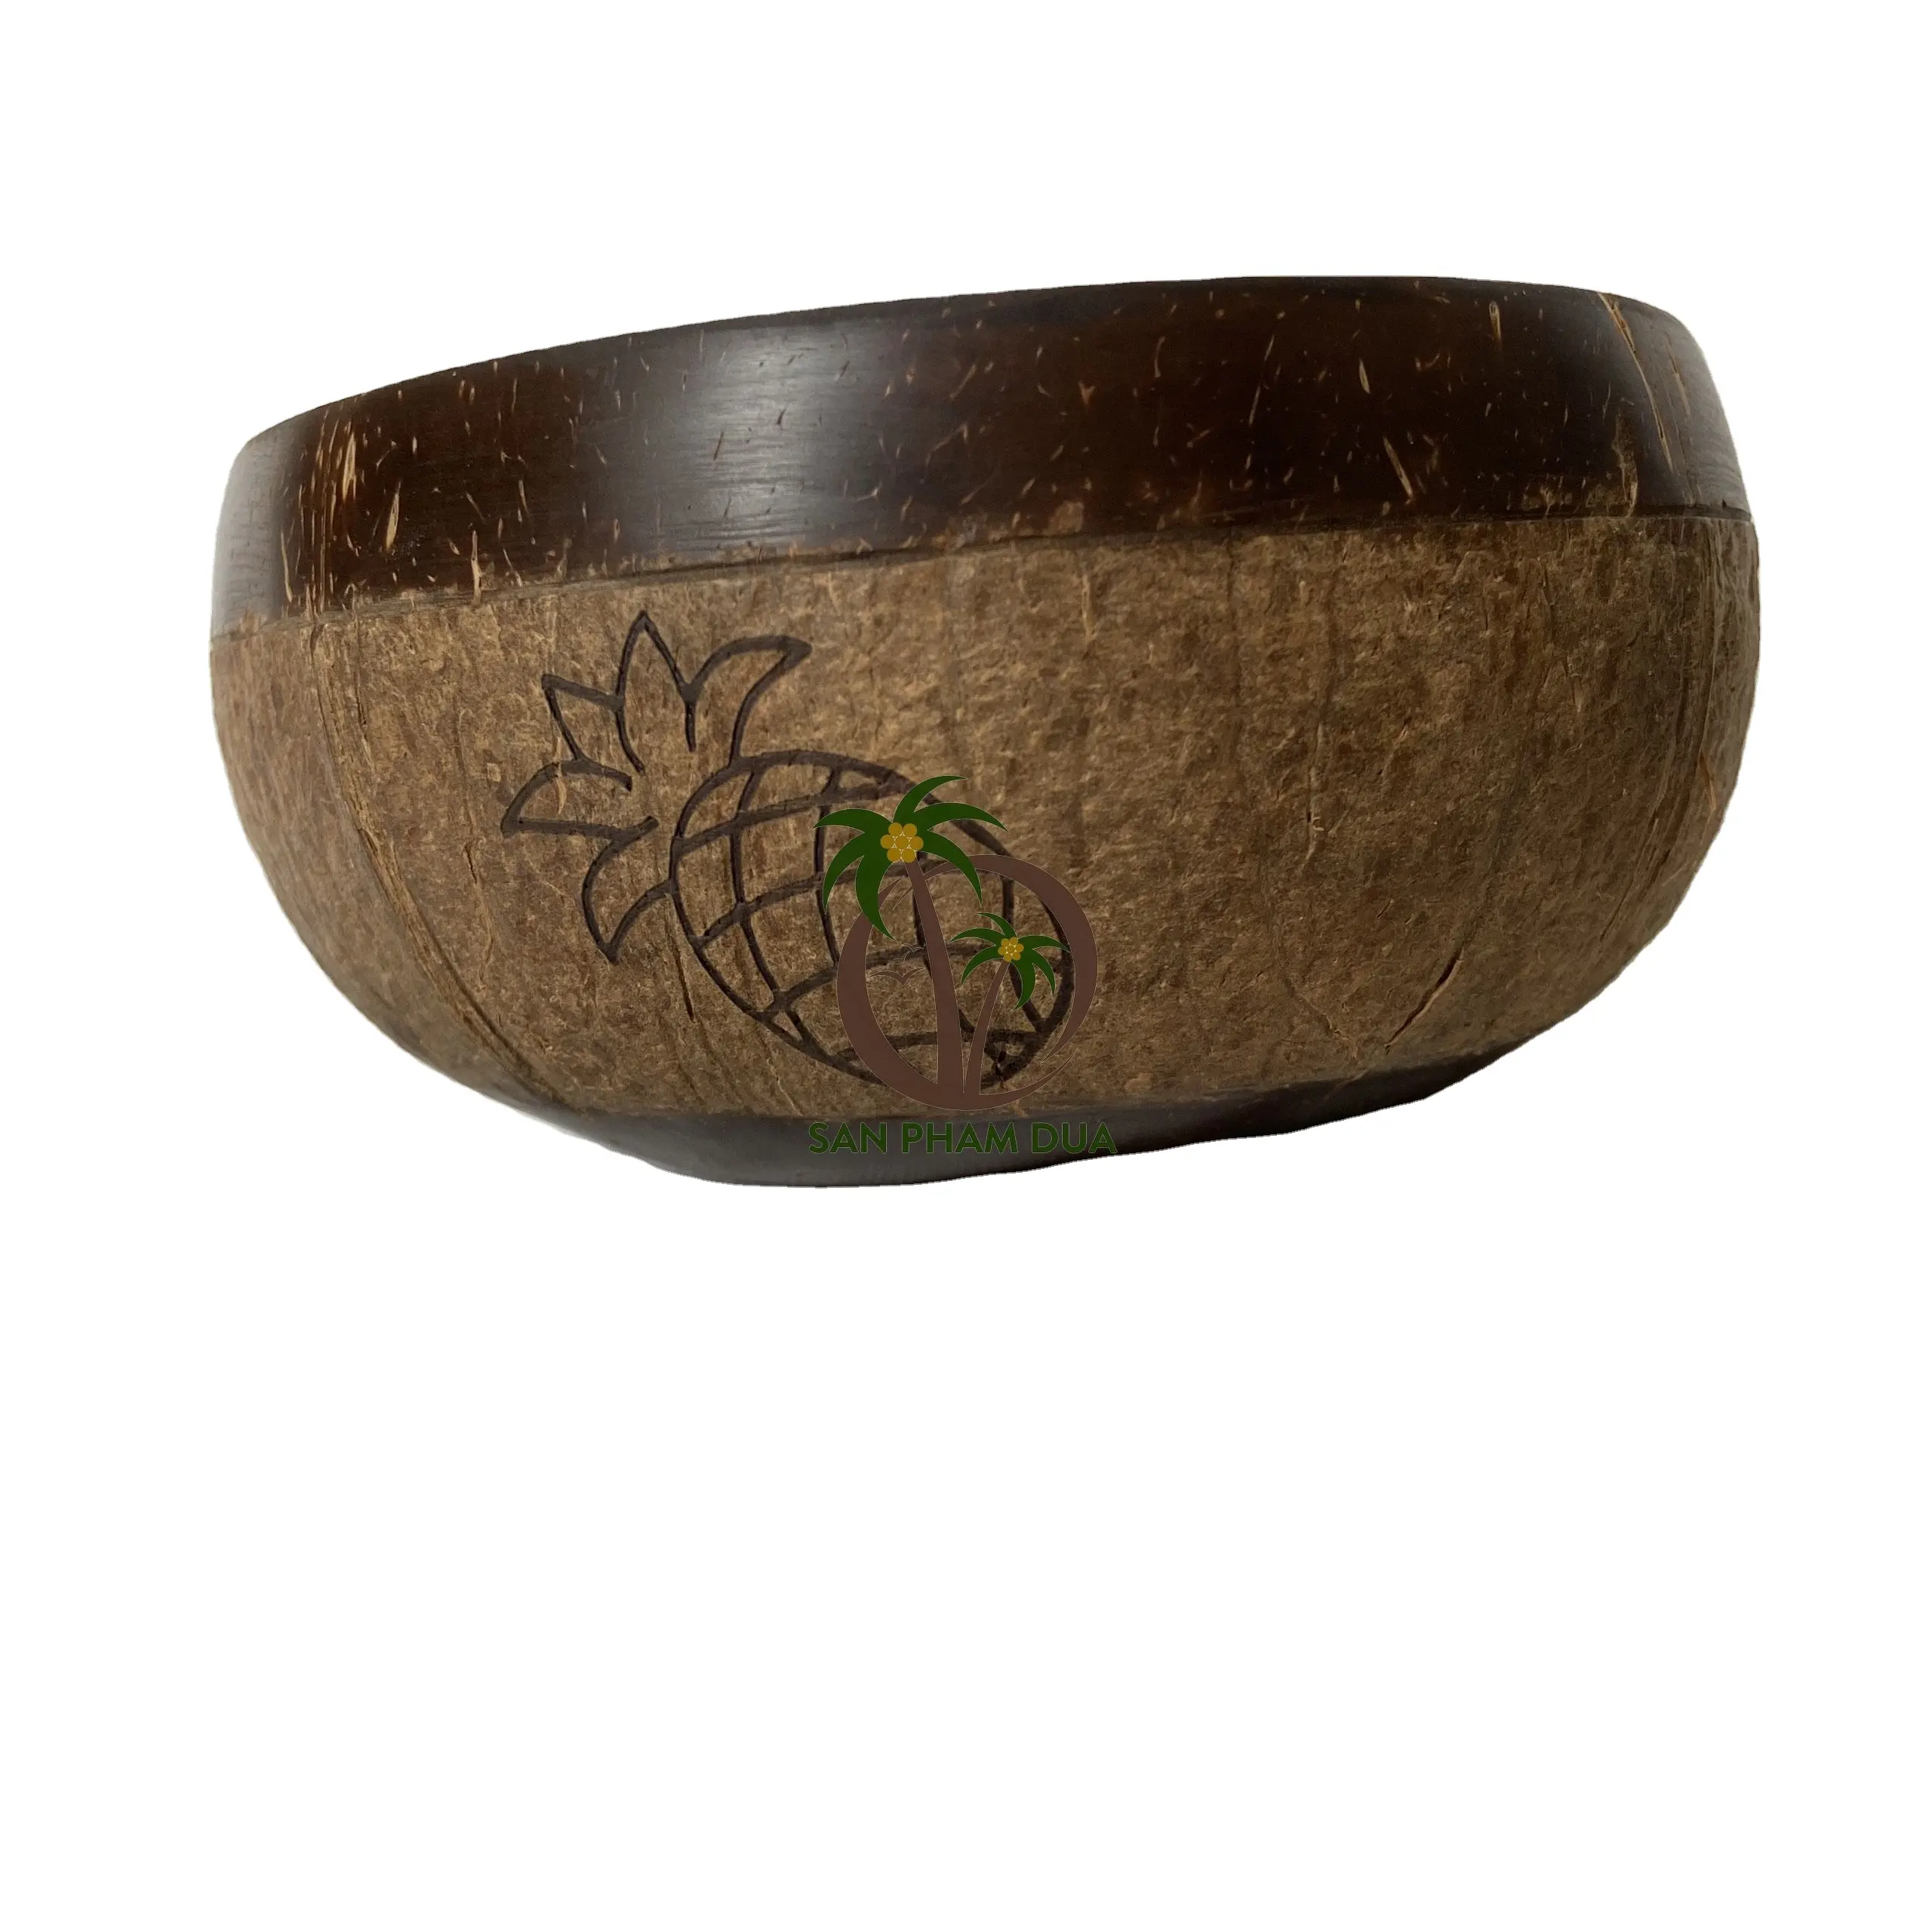 ORGANIC COCONUT BOWL FROM VIETNAM/ COCONUT DESIGN BOWL WITH SPOON/HIGH QUALITY LACQUER COCONUT BOWLS COCONUT SALAD BOWLS